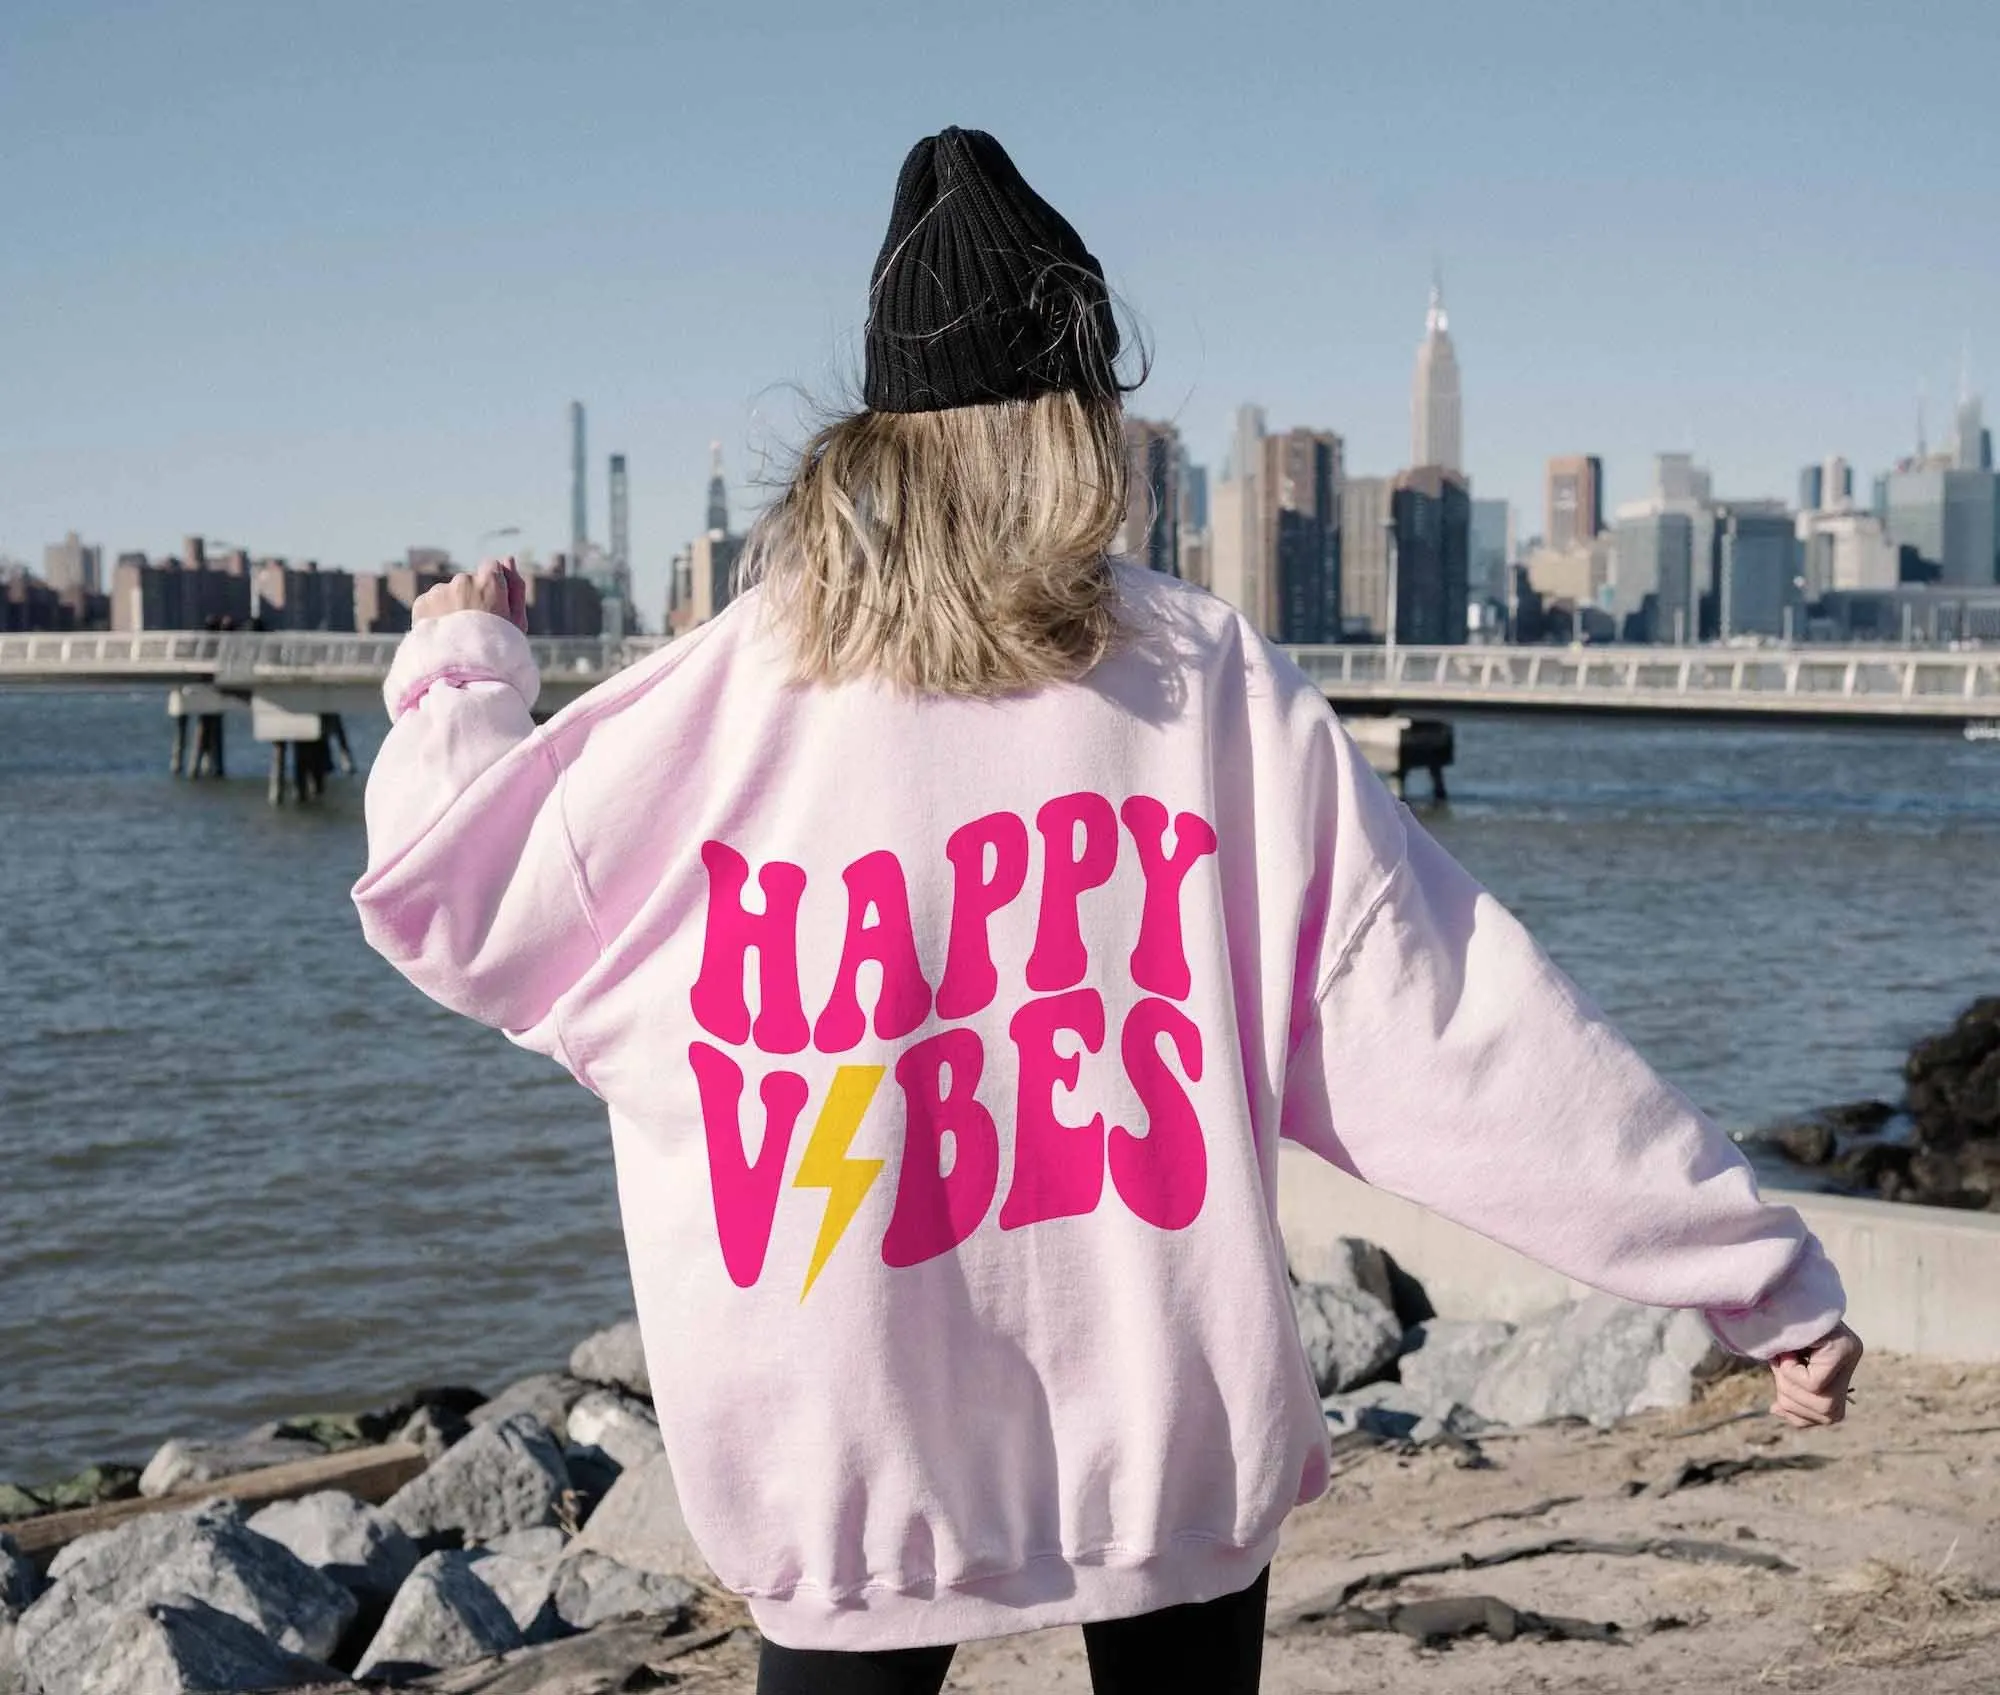 

Happy vibes graphic lighting Trendy Crewneck Fashion Positive Hoodie Preppy Aesthetic Clothes Cute pullovers quote cotton tops